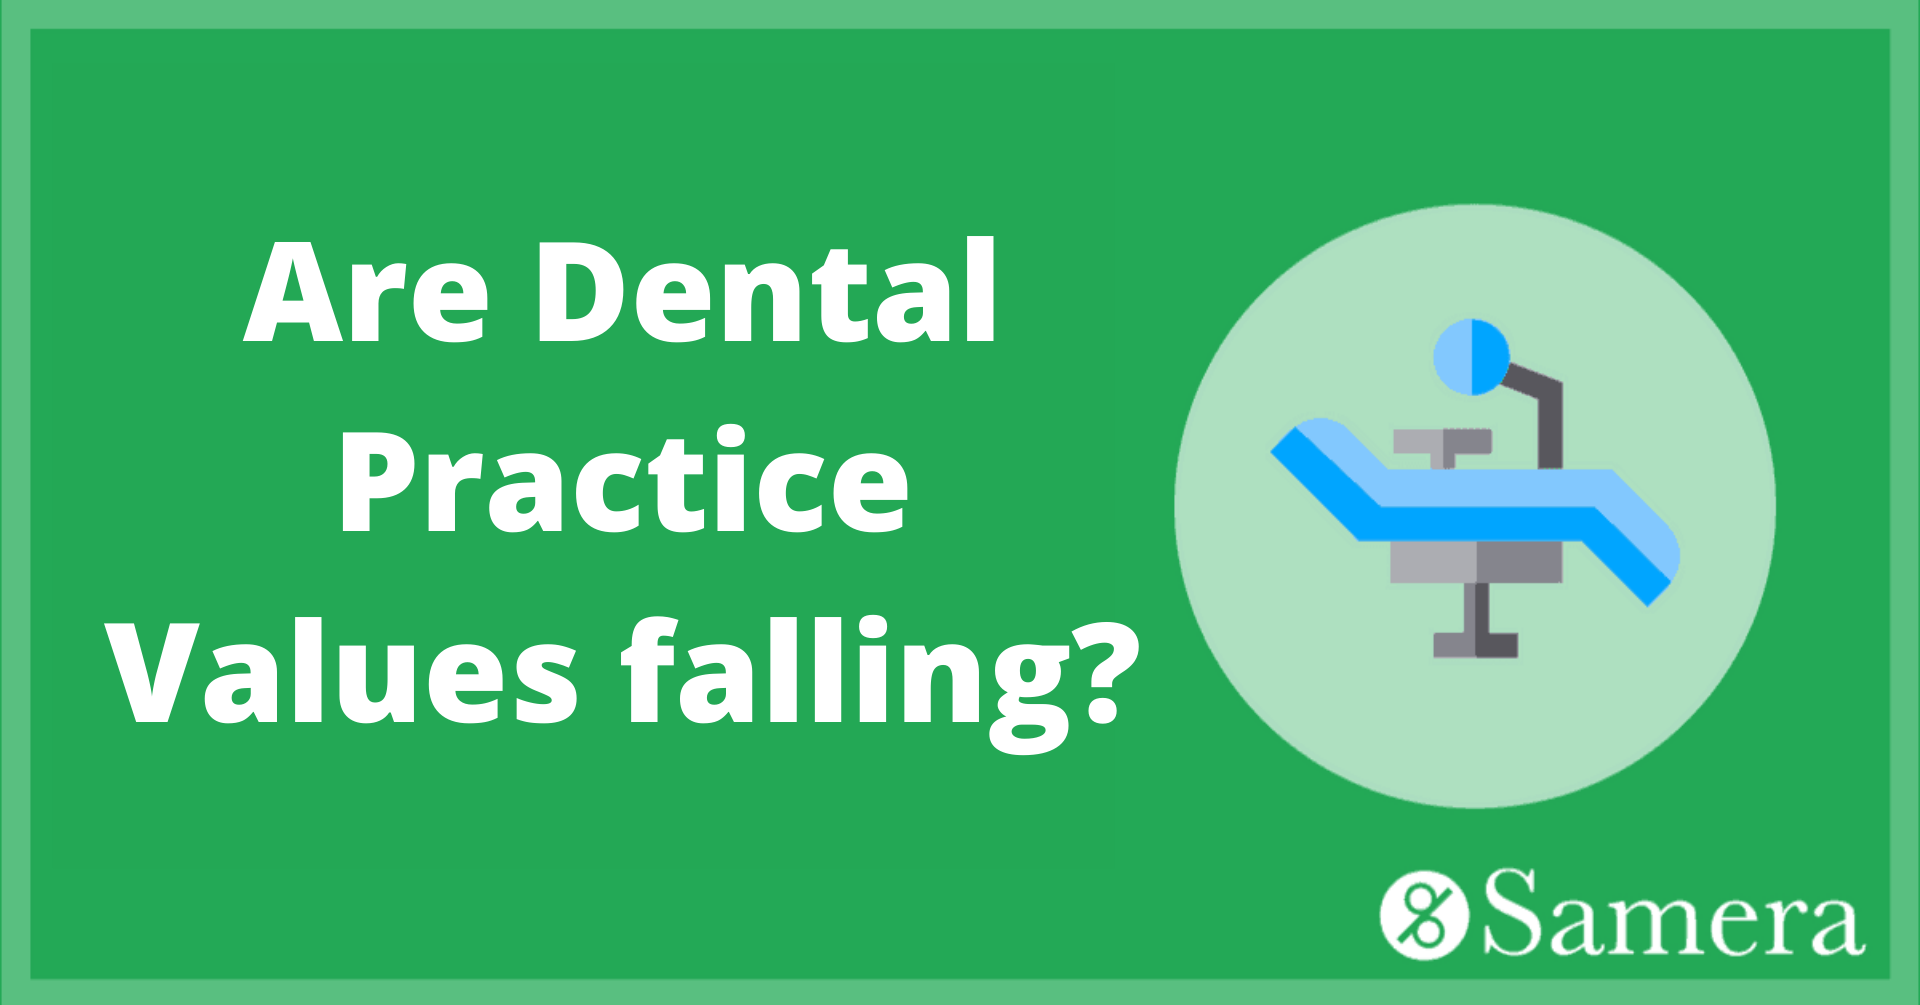 Are Dental Practice Values Falling